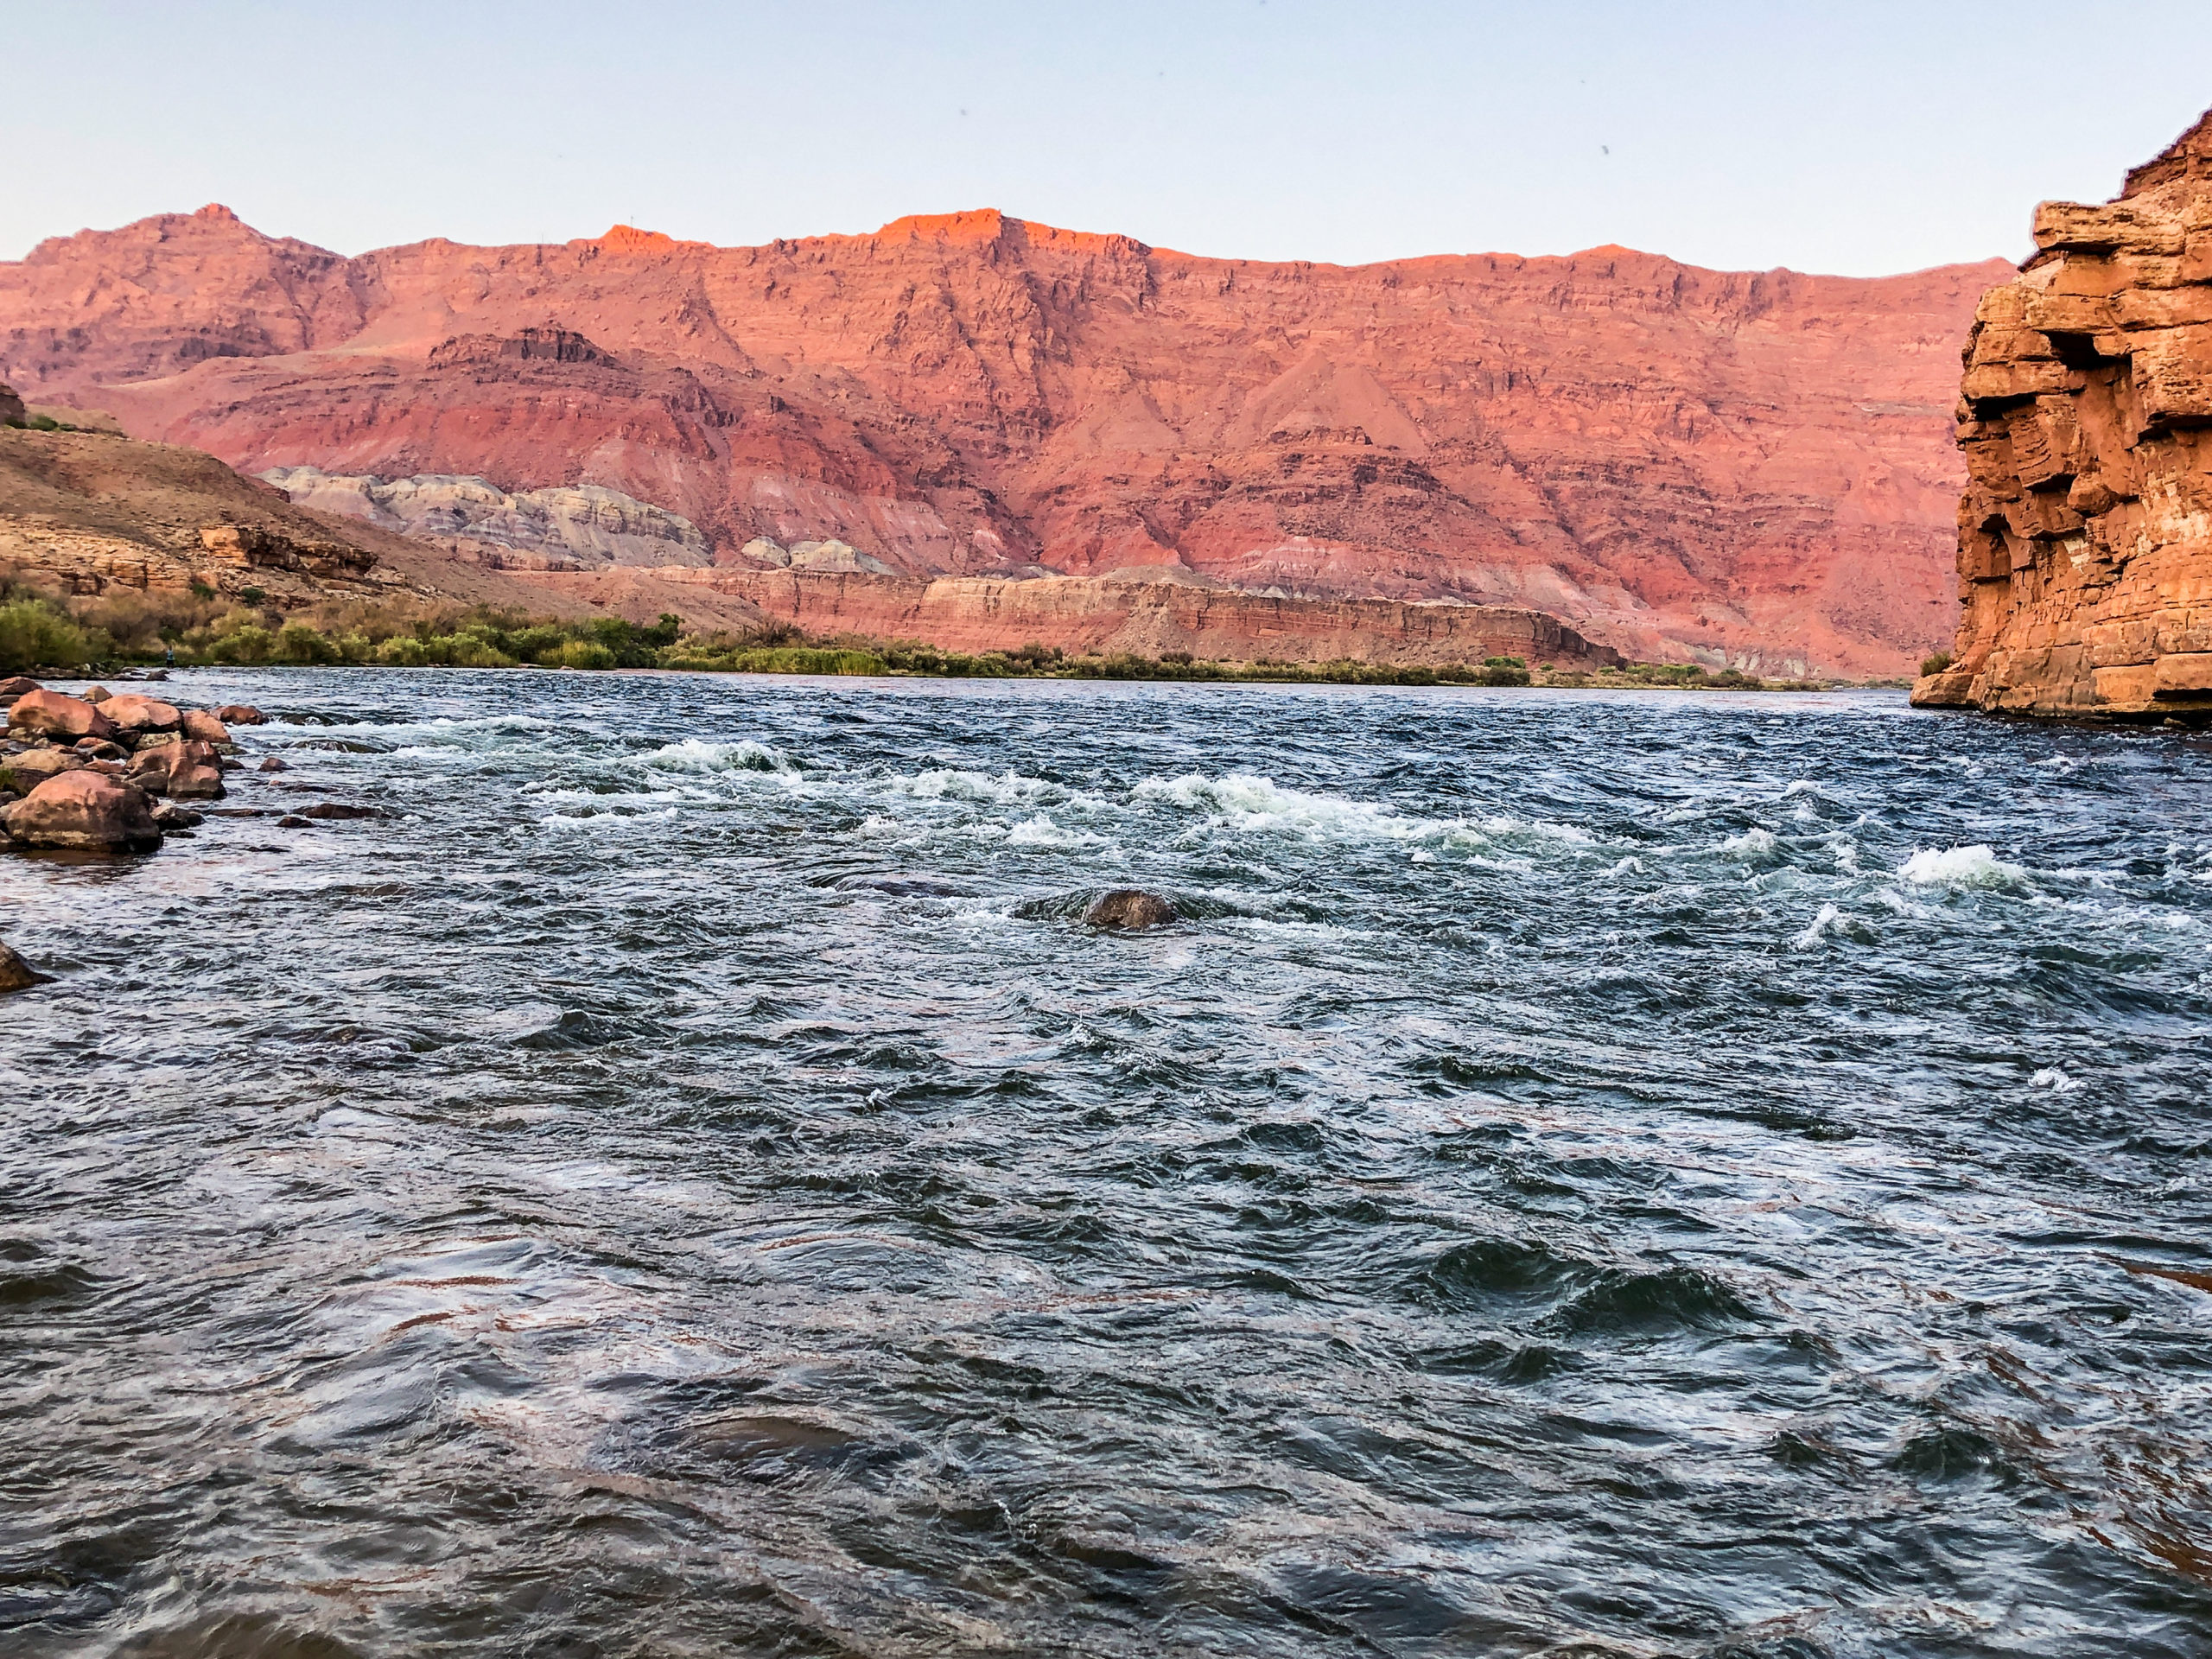 The Colorado River at the confluence with the Paria River. This spot marks the boundary between the Upper and Lower Colorado River basins. Water from this point flows through the Grand Canyon and on to Lake Mead. Photo credit: Denver Water.